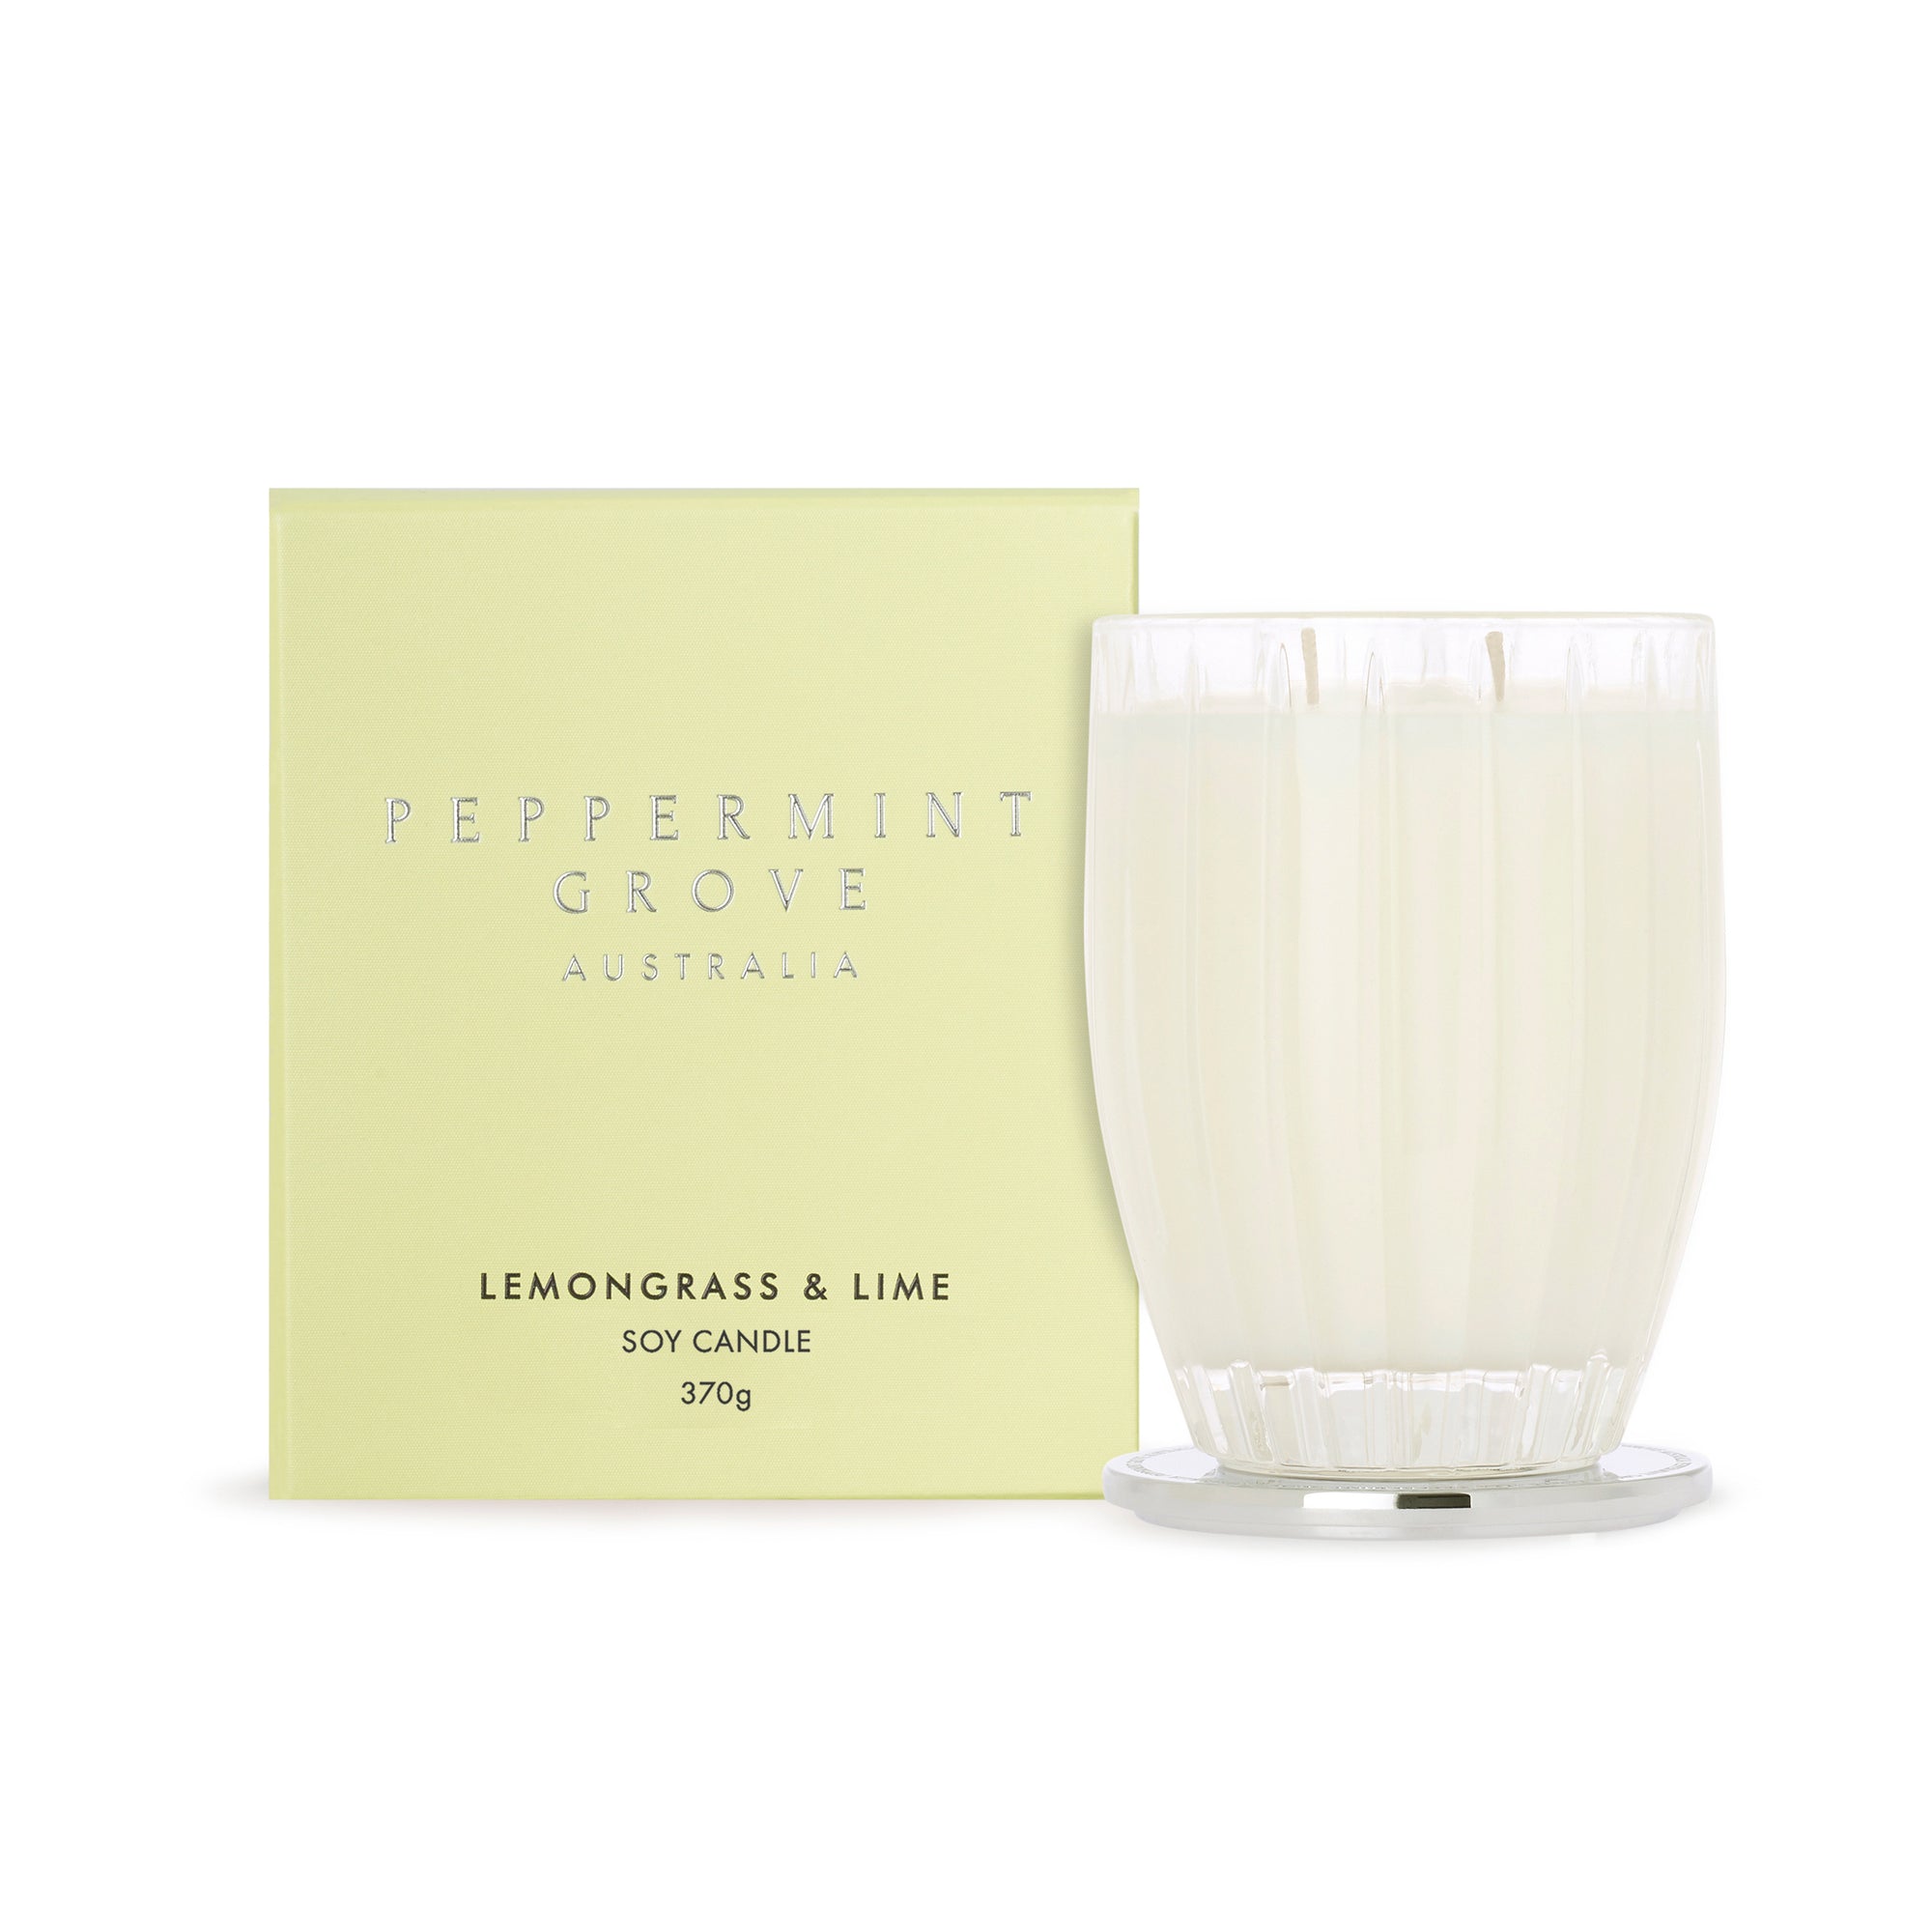 Peppermint Grove Lemongrass & Lime Large Soy Candle 370g